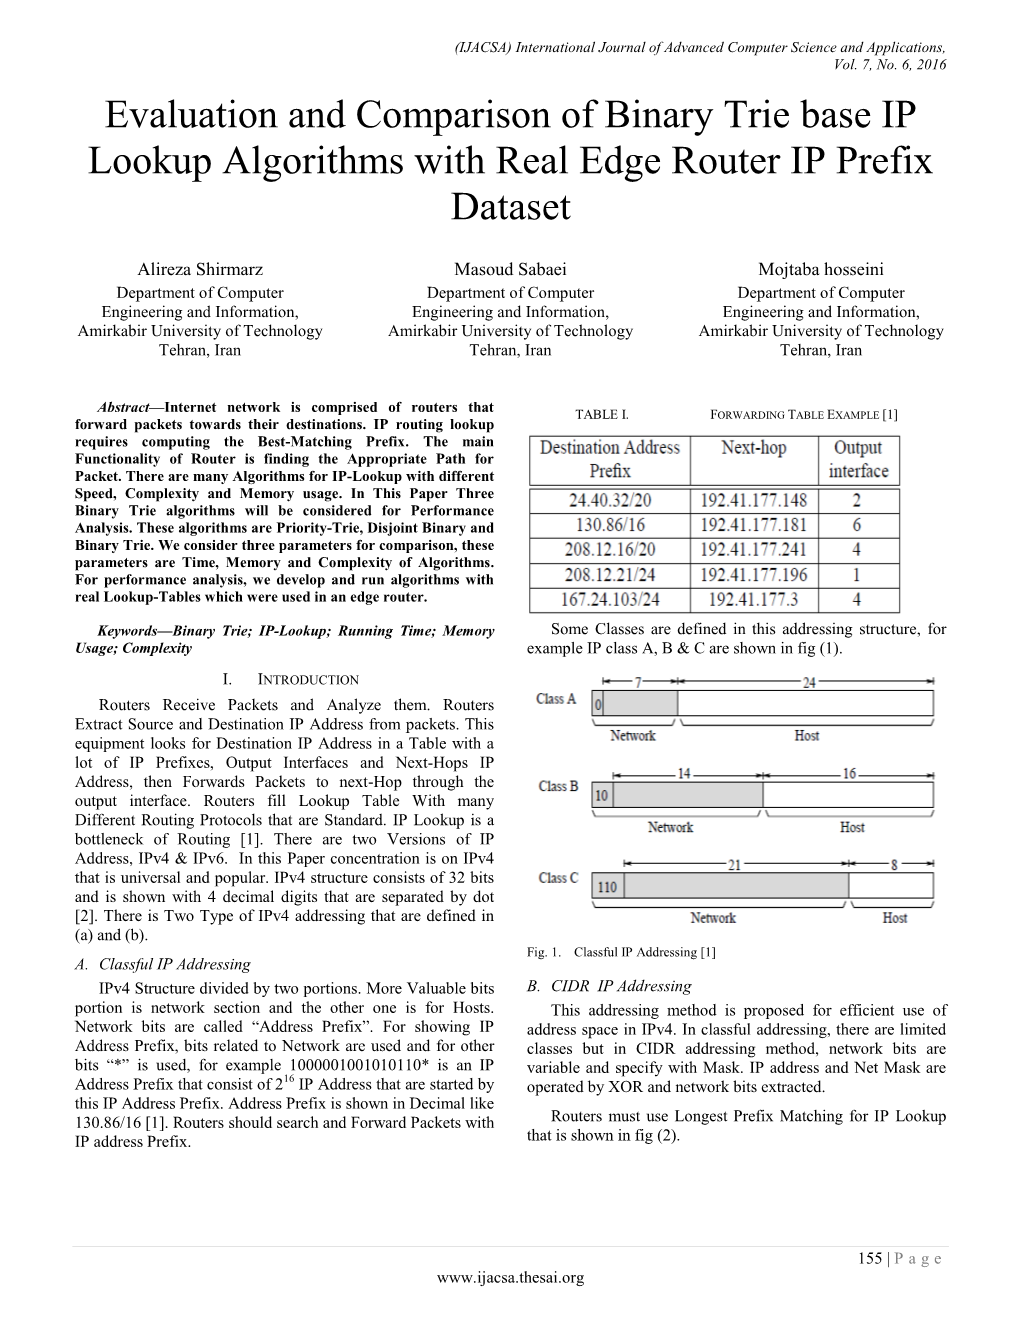 Evaluation and Comparison of Binary Trie Base IP Lookup Algorithms with Real Edge Router IP Prefix Dataset